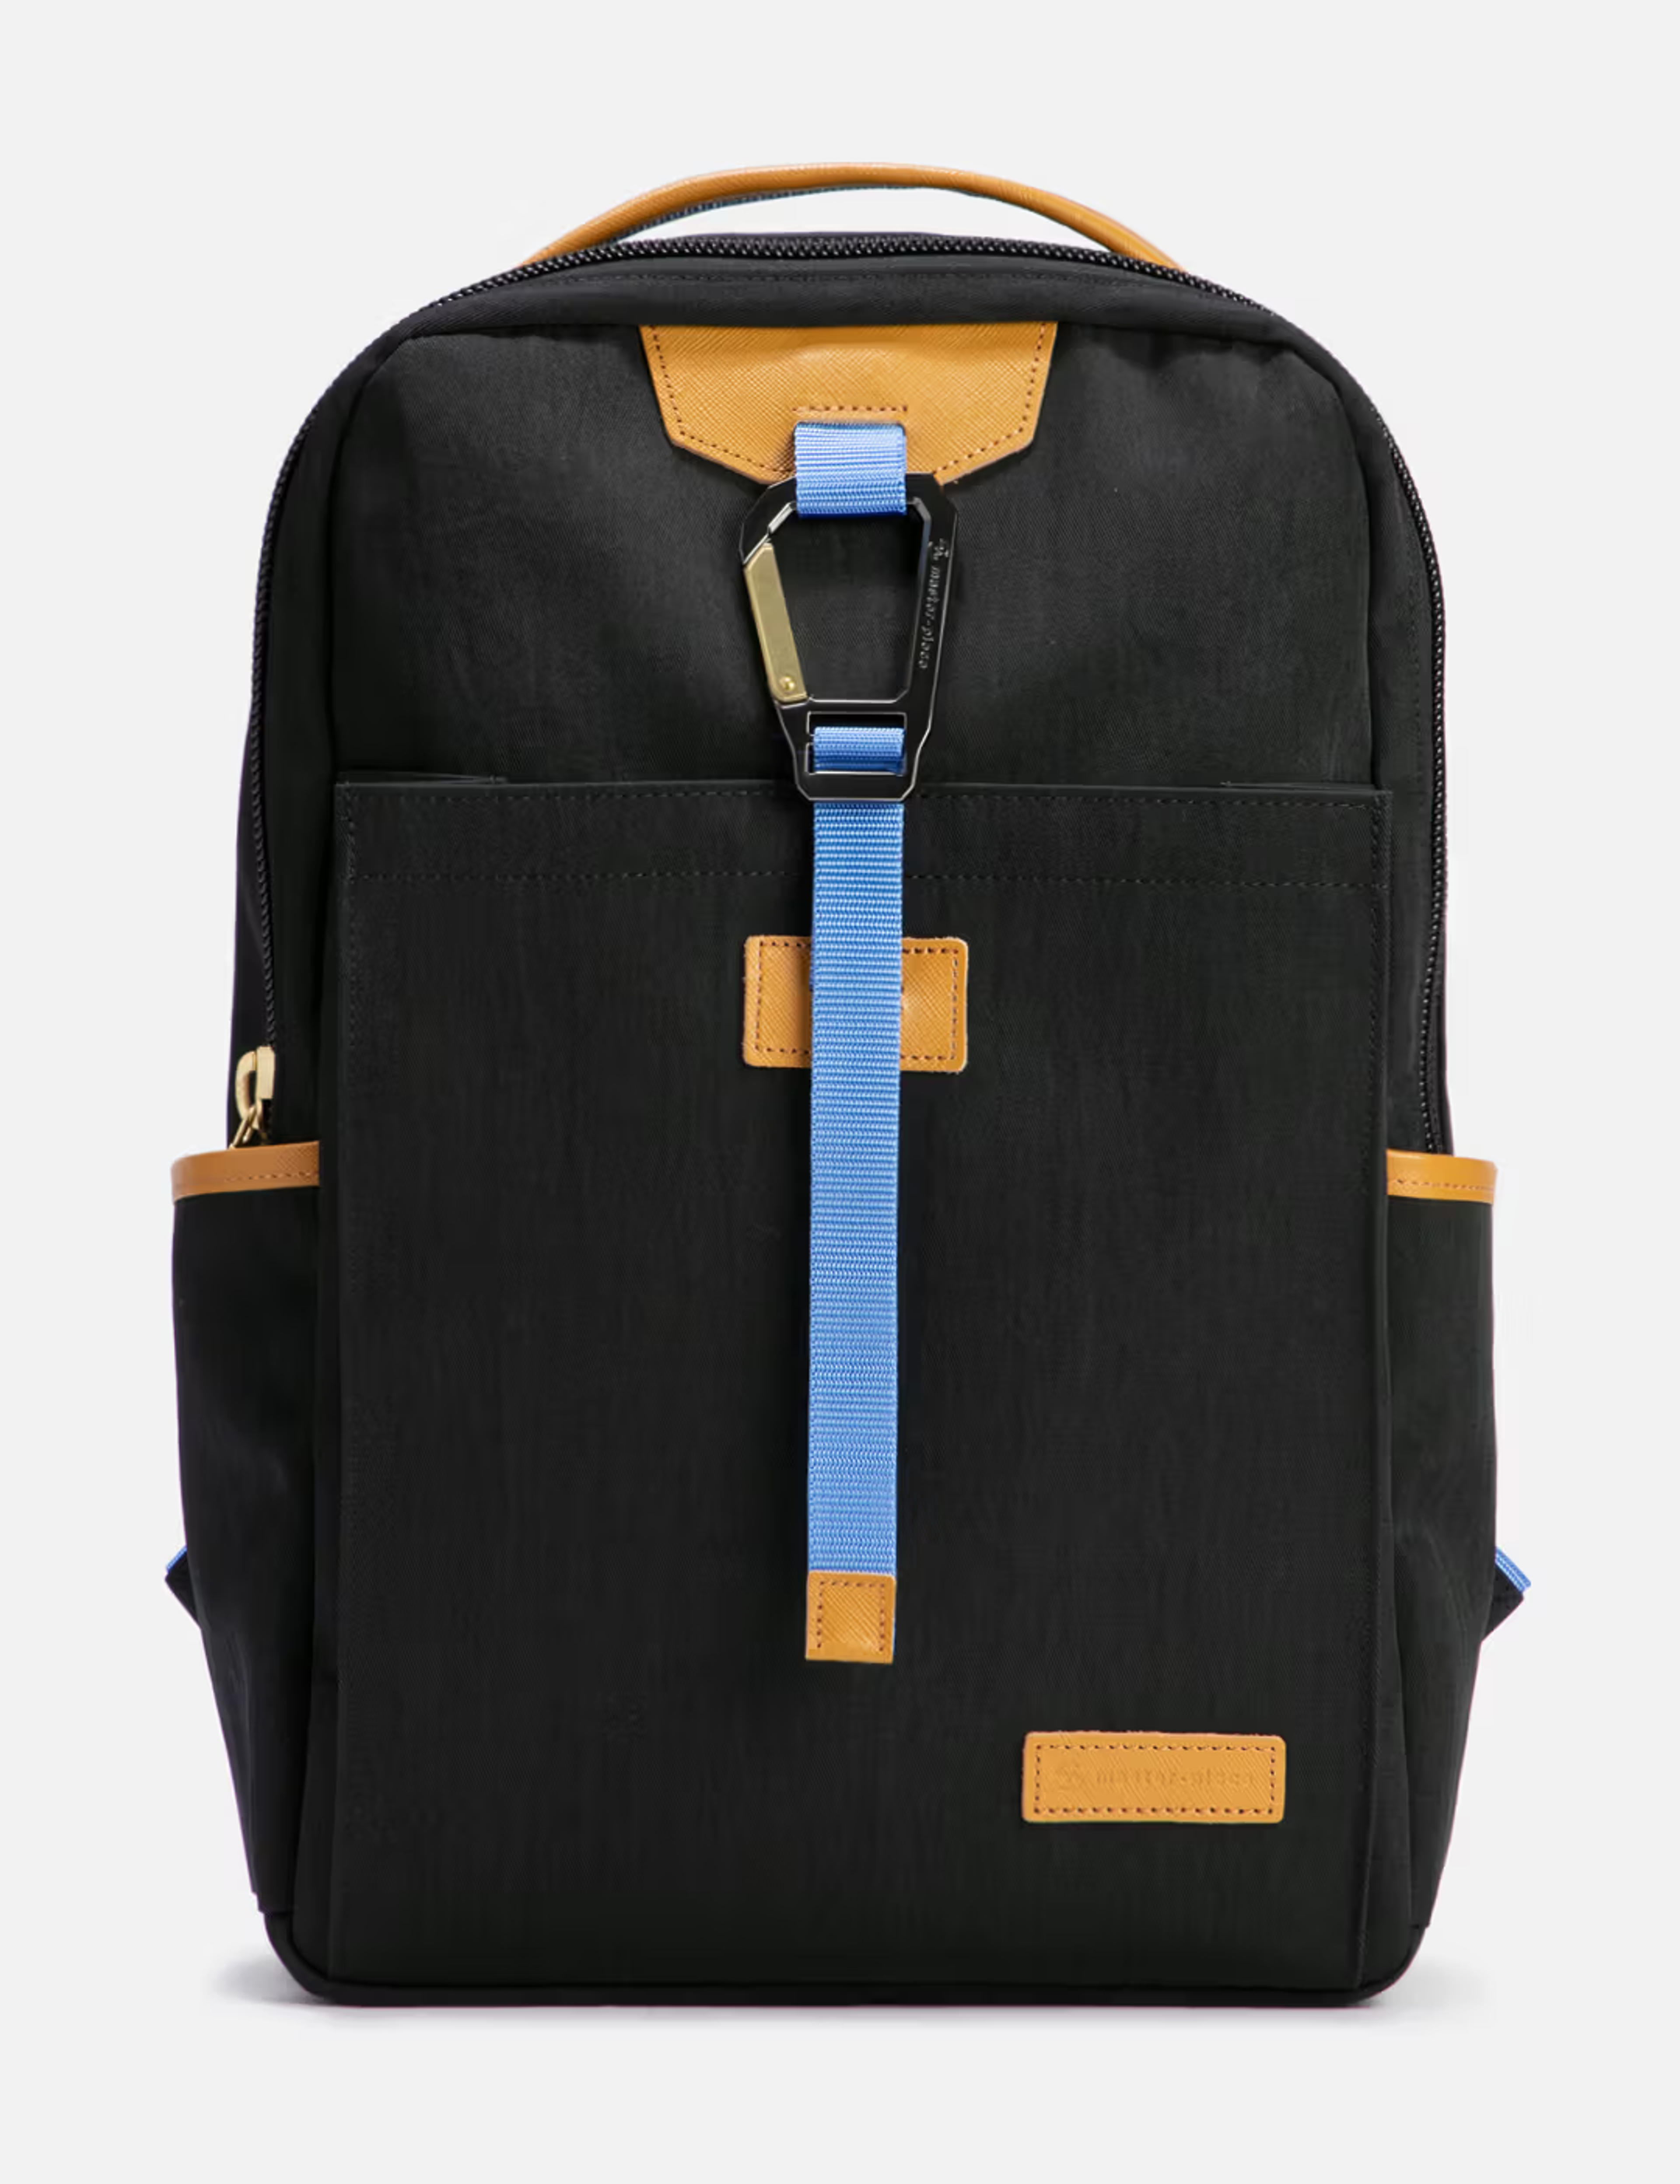 Master Piece - LINK BACKPACK | HBX - Globally Curated Fashion and Lifestyle by Hypebeast